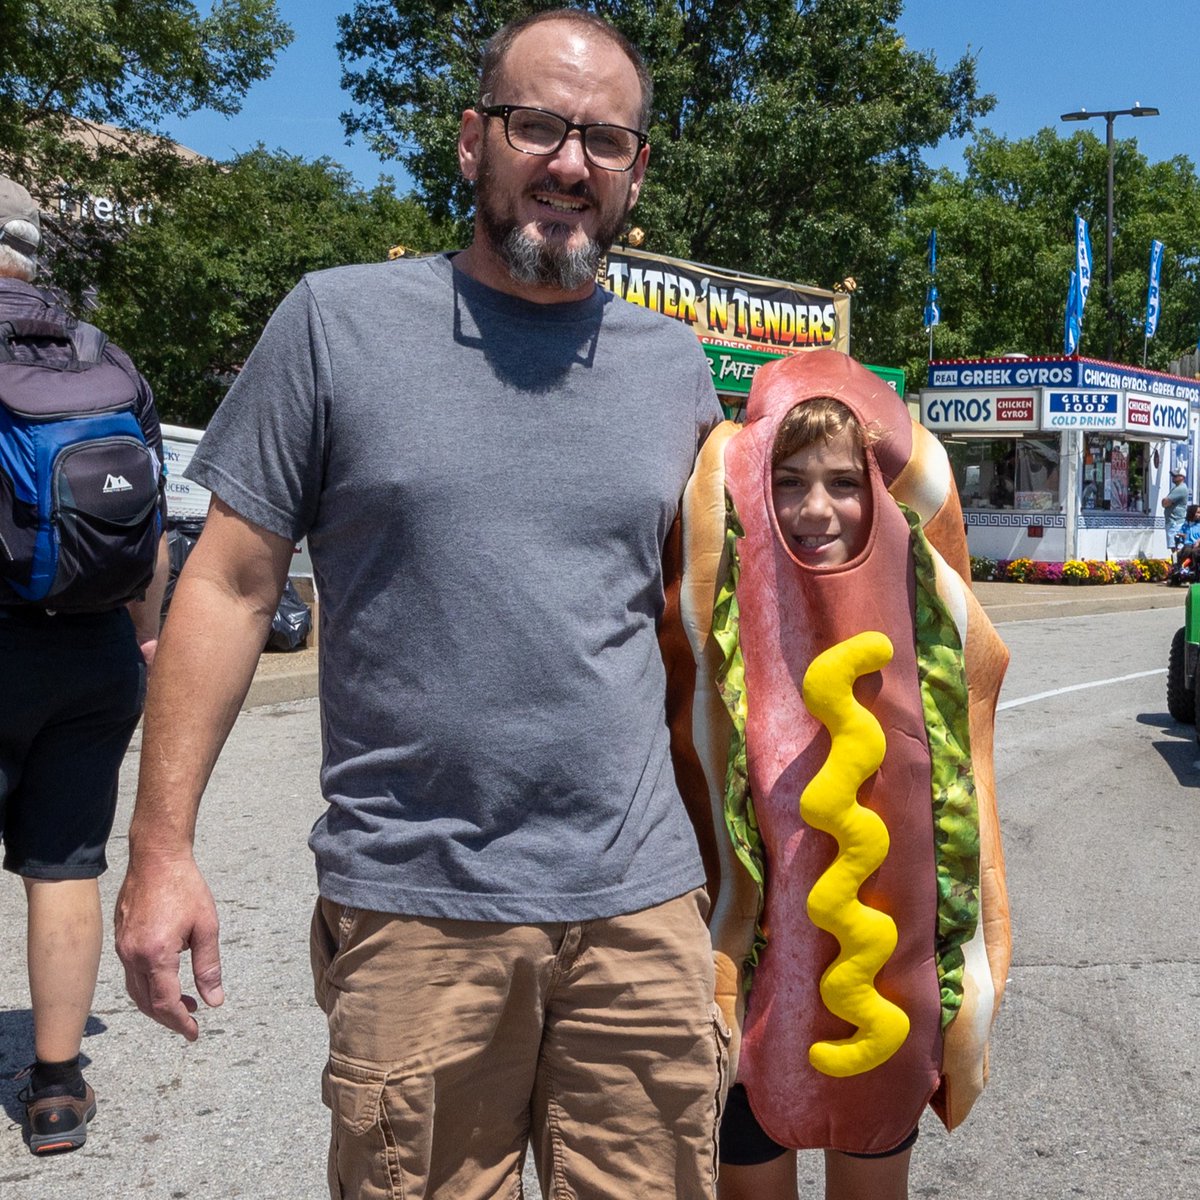 Hot dog costumes aren't required, but they're always encouraged.